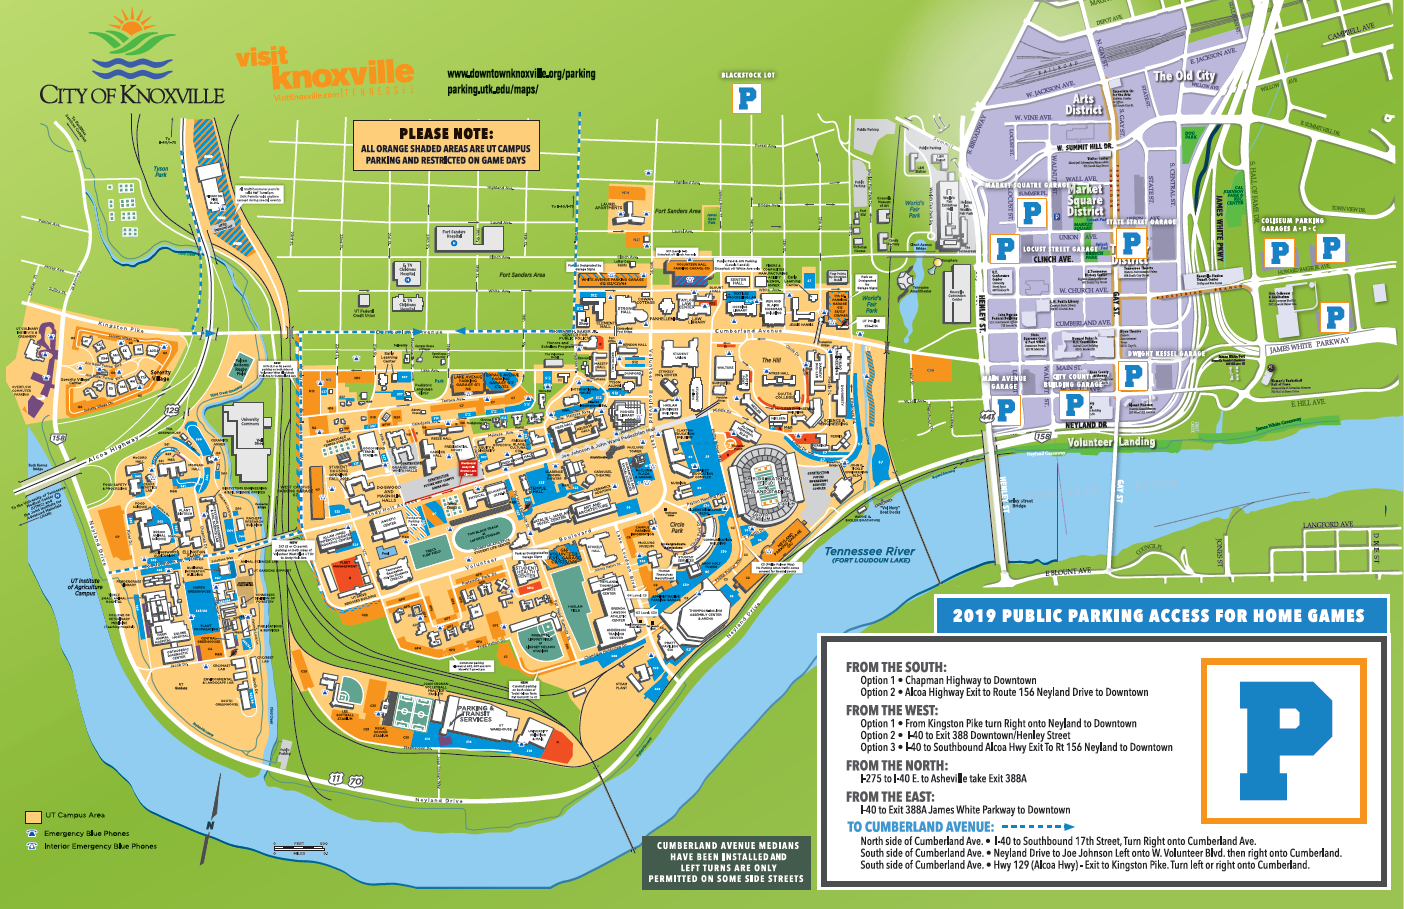 map of knoxville tn and surrounding cities 2019 Ut City Of Knoxville Football Public Parking Map Parking map of knoxville tn and surrounding cities